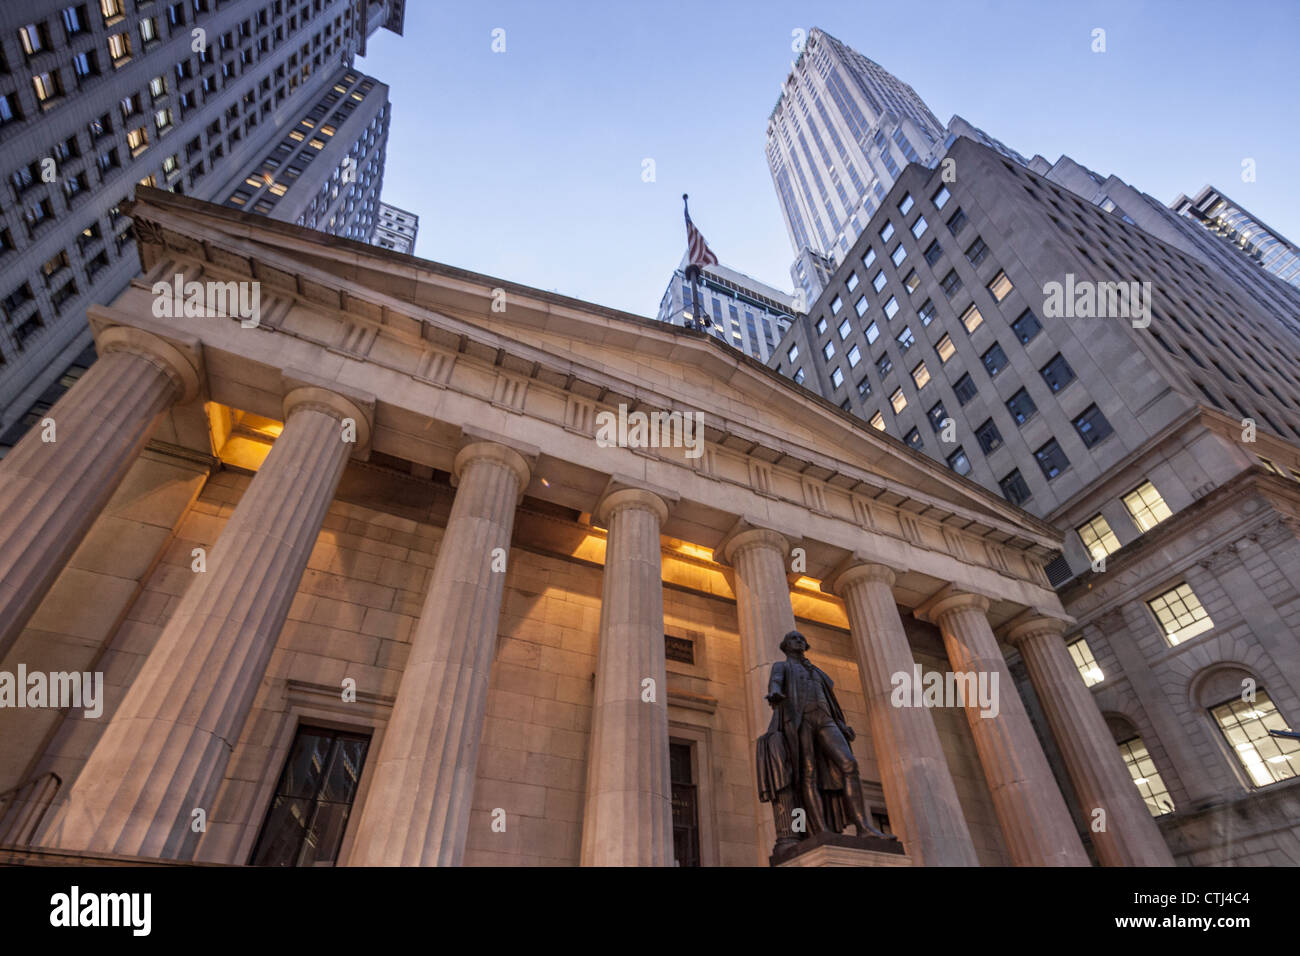 Federal Hall, Wall Street, Financial District, New York City, USA Banque D'Images